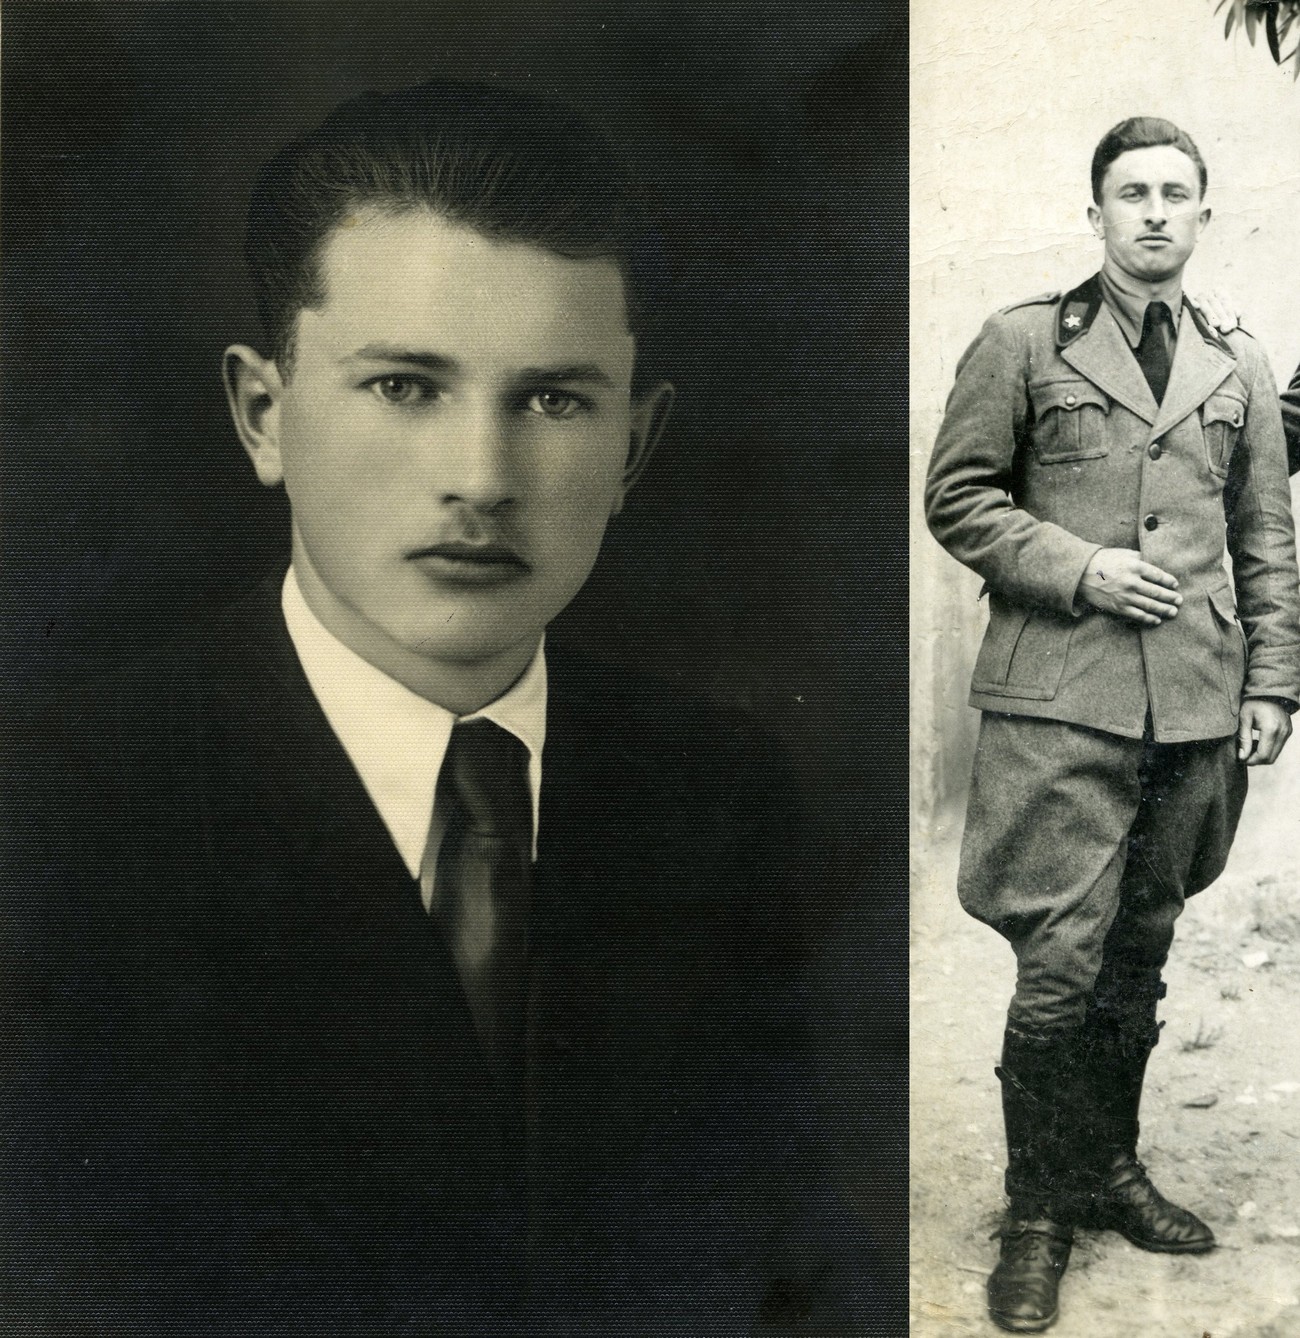 Despite the Italian occupation of the Province of Ljubljana in April of 1941, police and tax control was still carried out on the Rapallo Border. While taking some time off from serving in the Italian army, Bogomir Eržen from Idrija (seen on the right) and his brother Danijel went to Rovte, where they bought a Czech machine gun Zbrojovka from a butcher. They took it past the financier’s office in Dole and smuggled it back to Idrija. When the anti-Italian resistance started in 1942, they handed over the weapon to Vojko’s unit, while also joining the Partisans. Private archive of Ivica Kavčič.